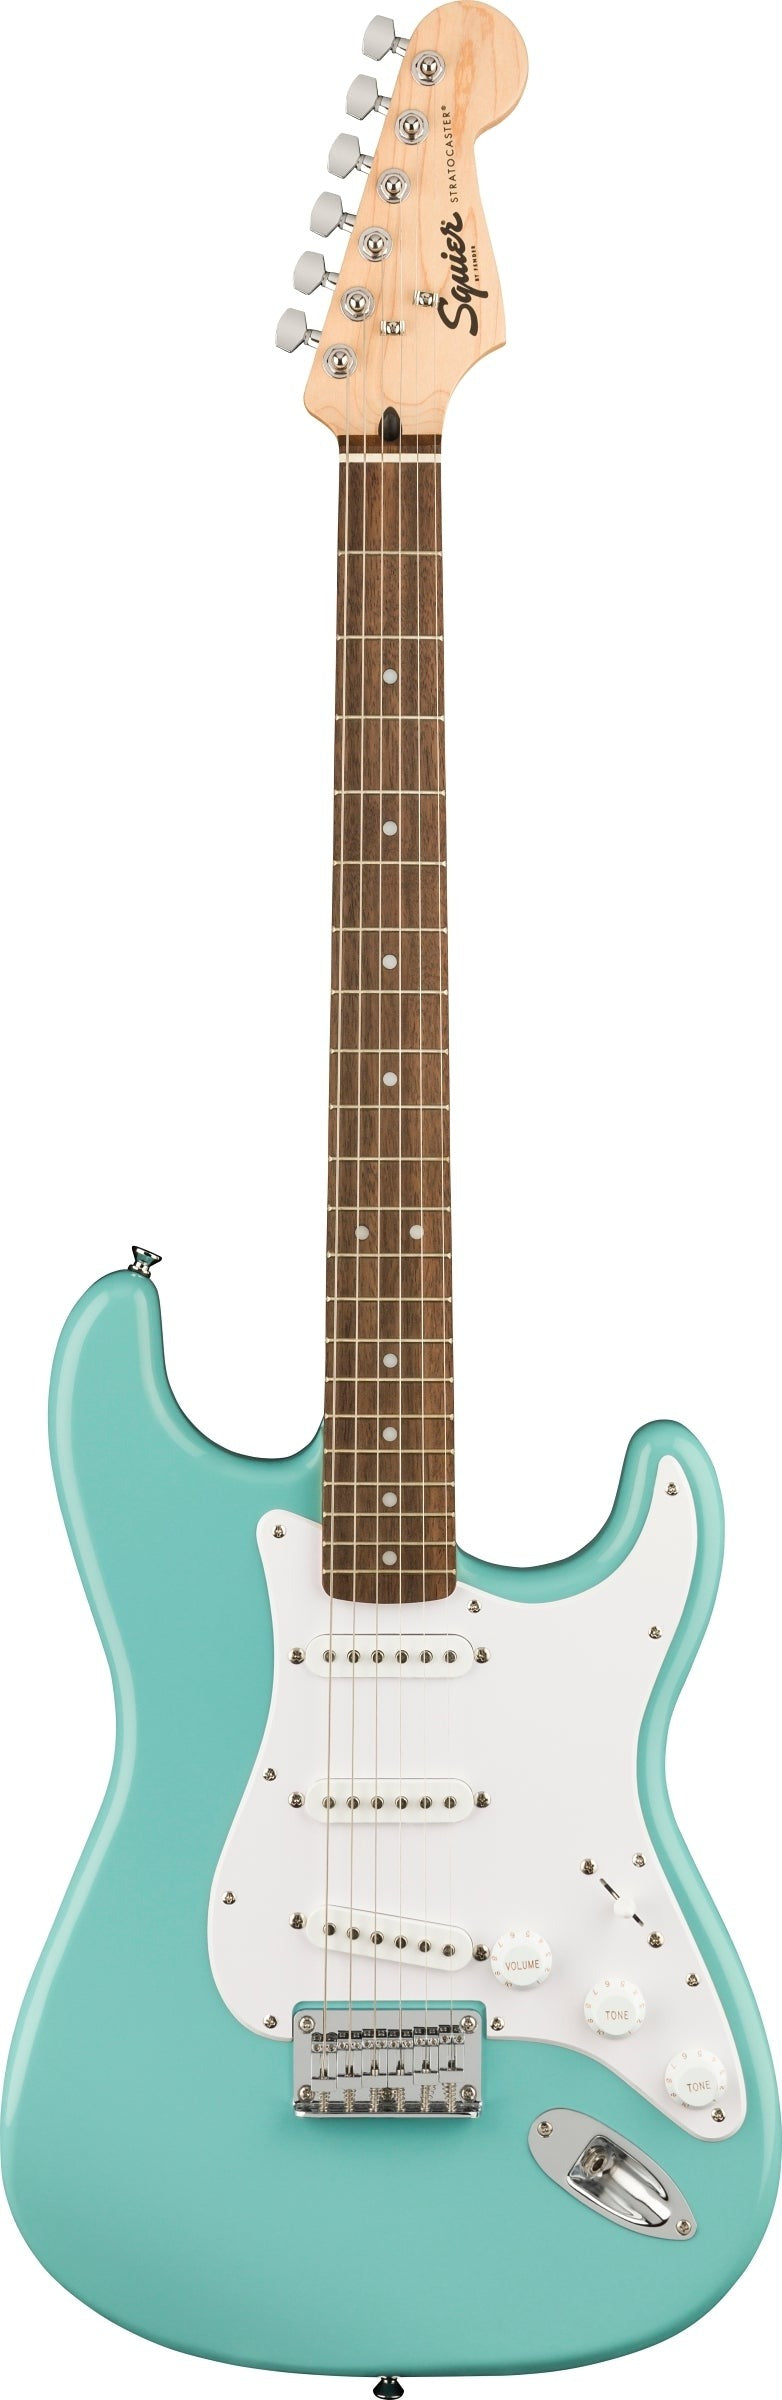 Squier Bullet HT Stratocaster Electric Guitar - Tropical Turquoise